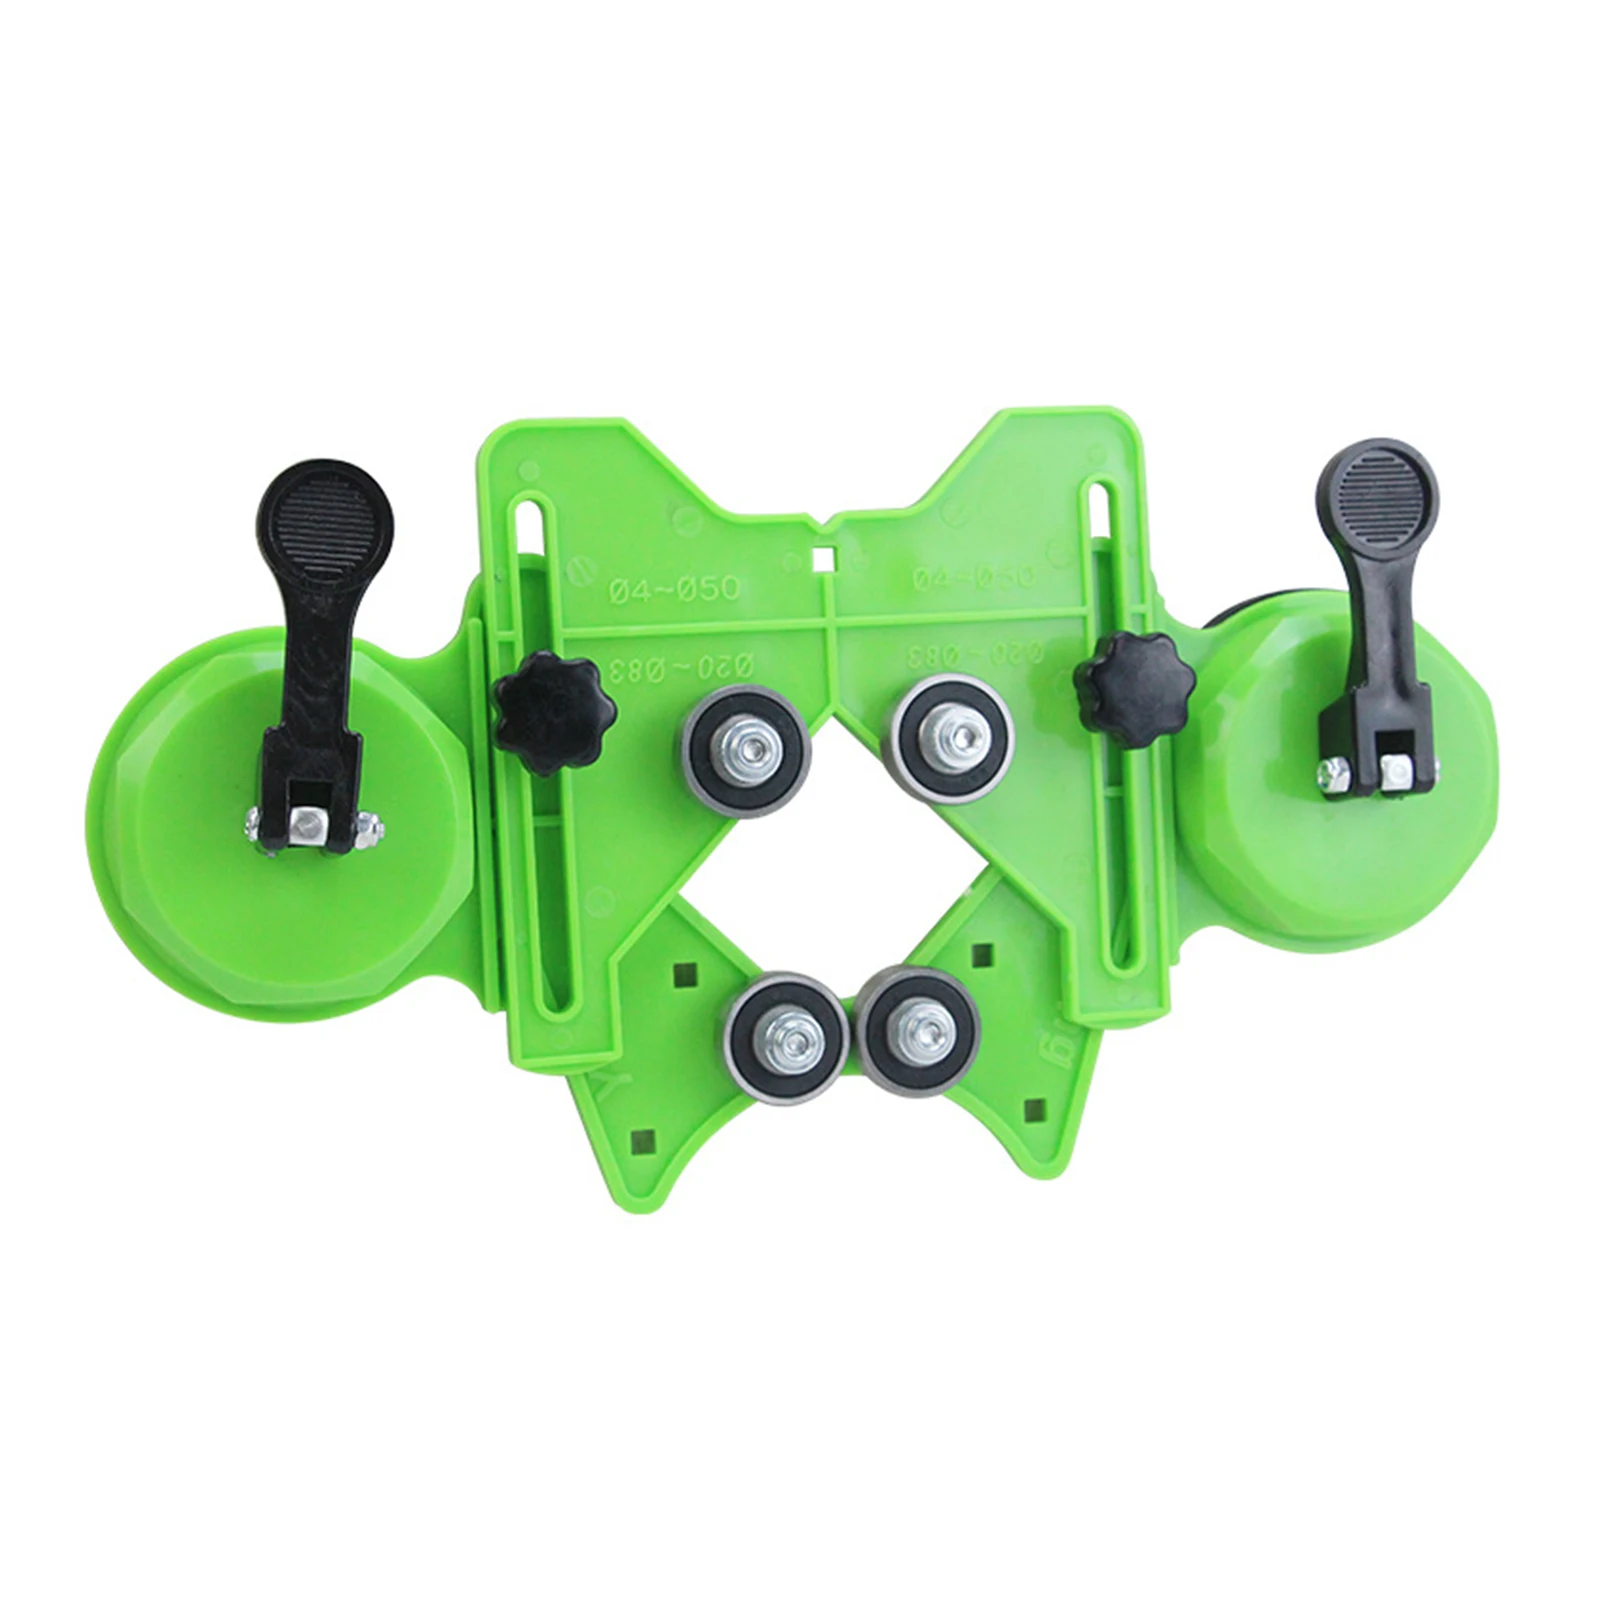 

4-84mm Glass Tiles Drill Guide Openings Jig Fixture Adjustable Hole Locator Cutter Easy Use Portable Centering Double Handle